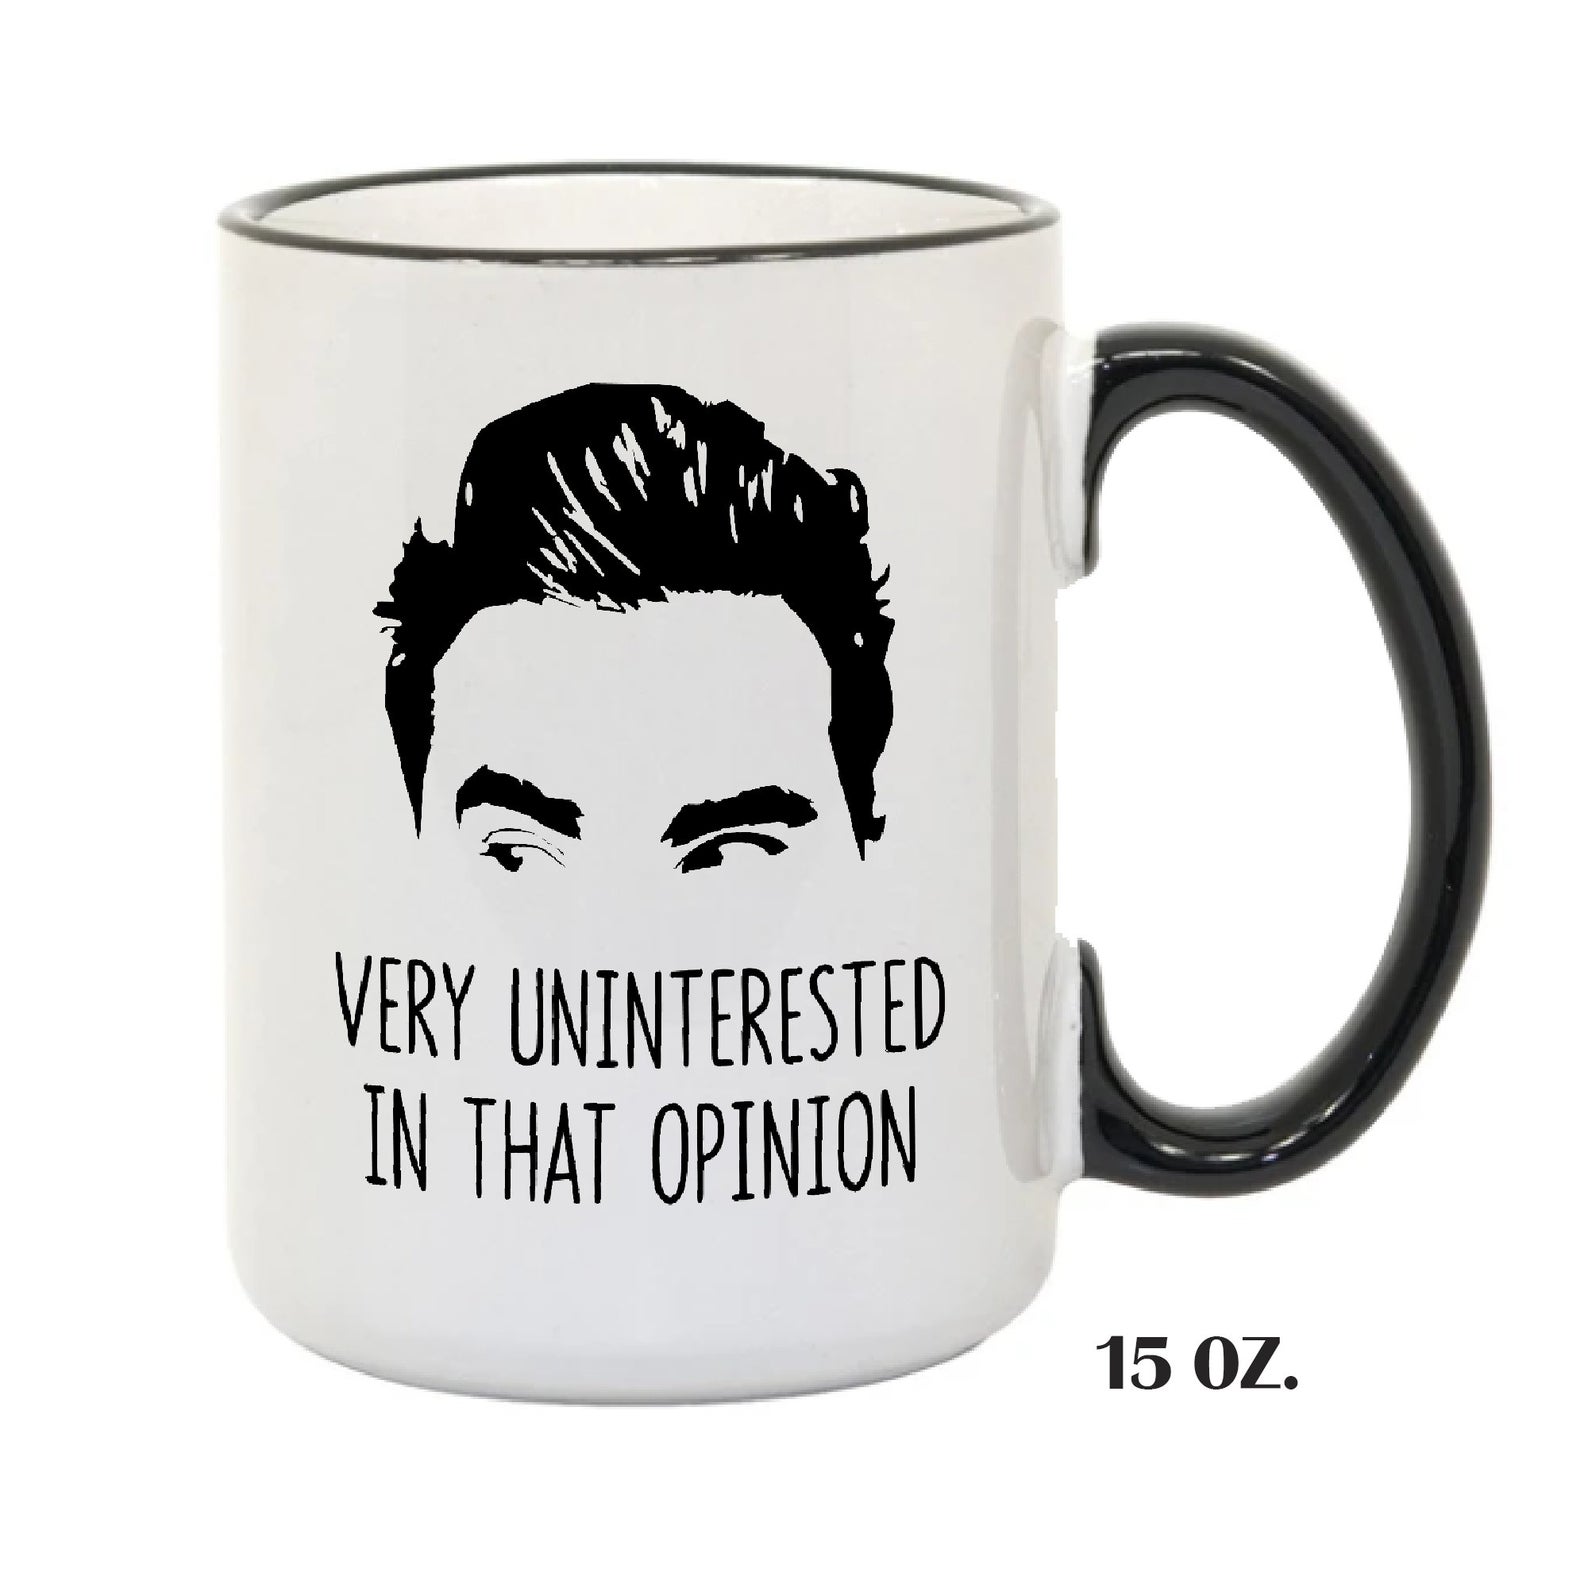 Schitts Creek Gifts - Birthday Card - Uninterested in that Opinion Mug